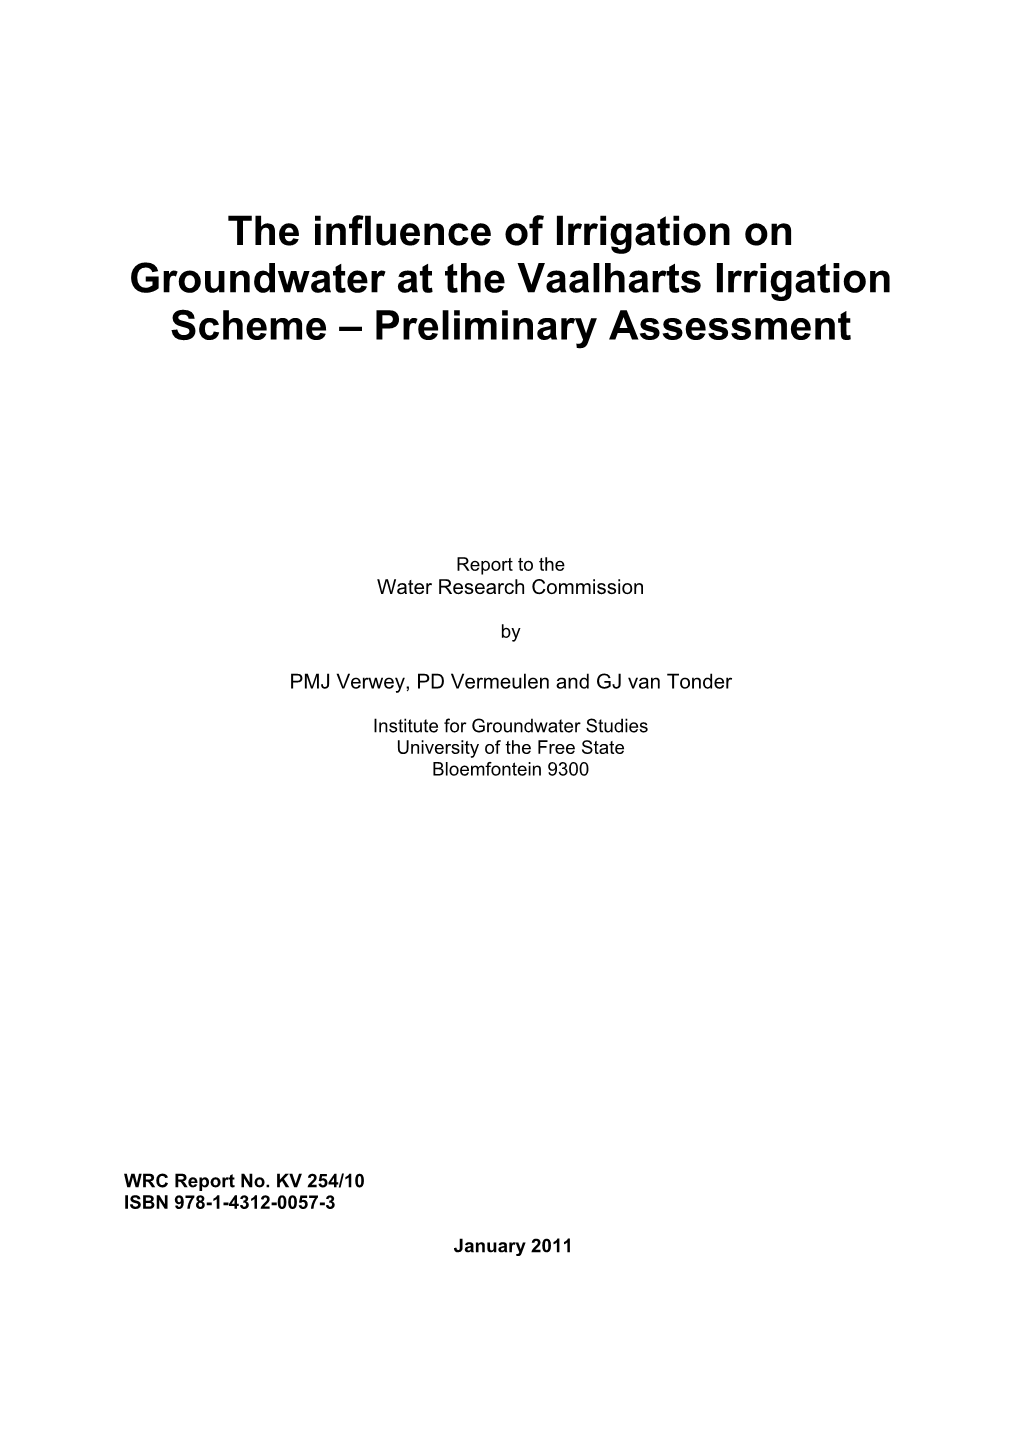 The Influence of Irrigation on Groundwater at the Vaalharts Irrigation Scheme – Preliminary Assessment